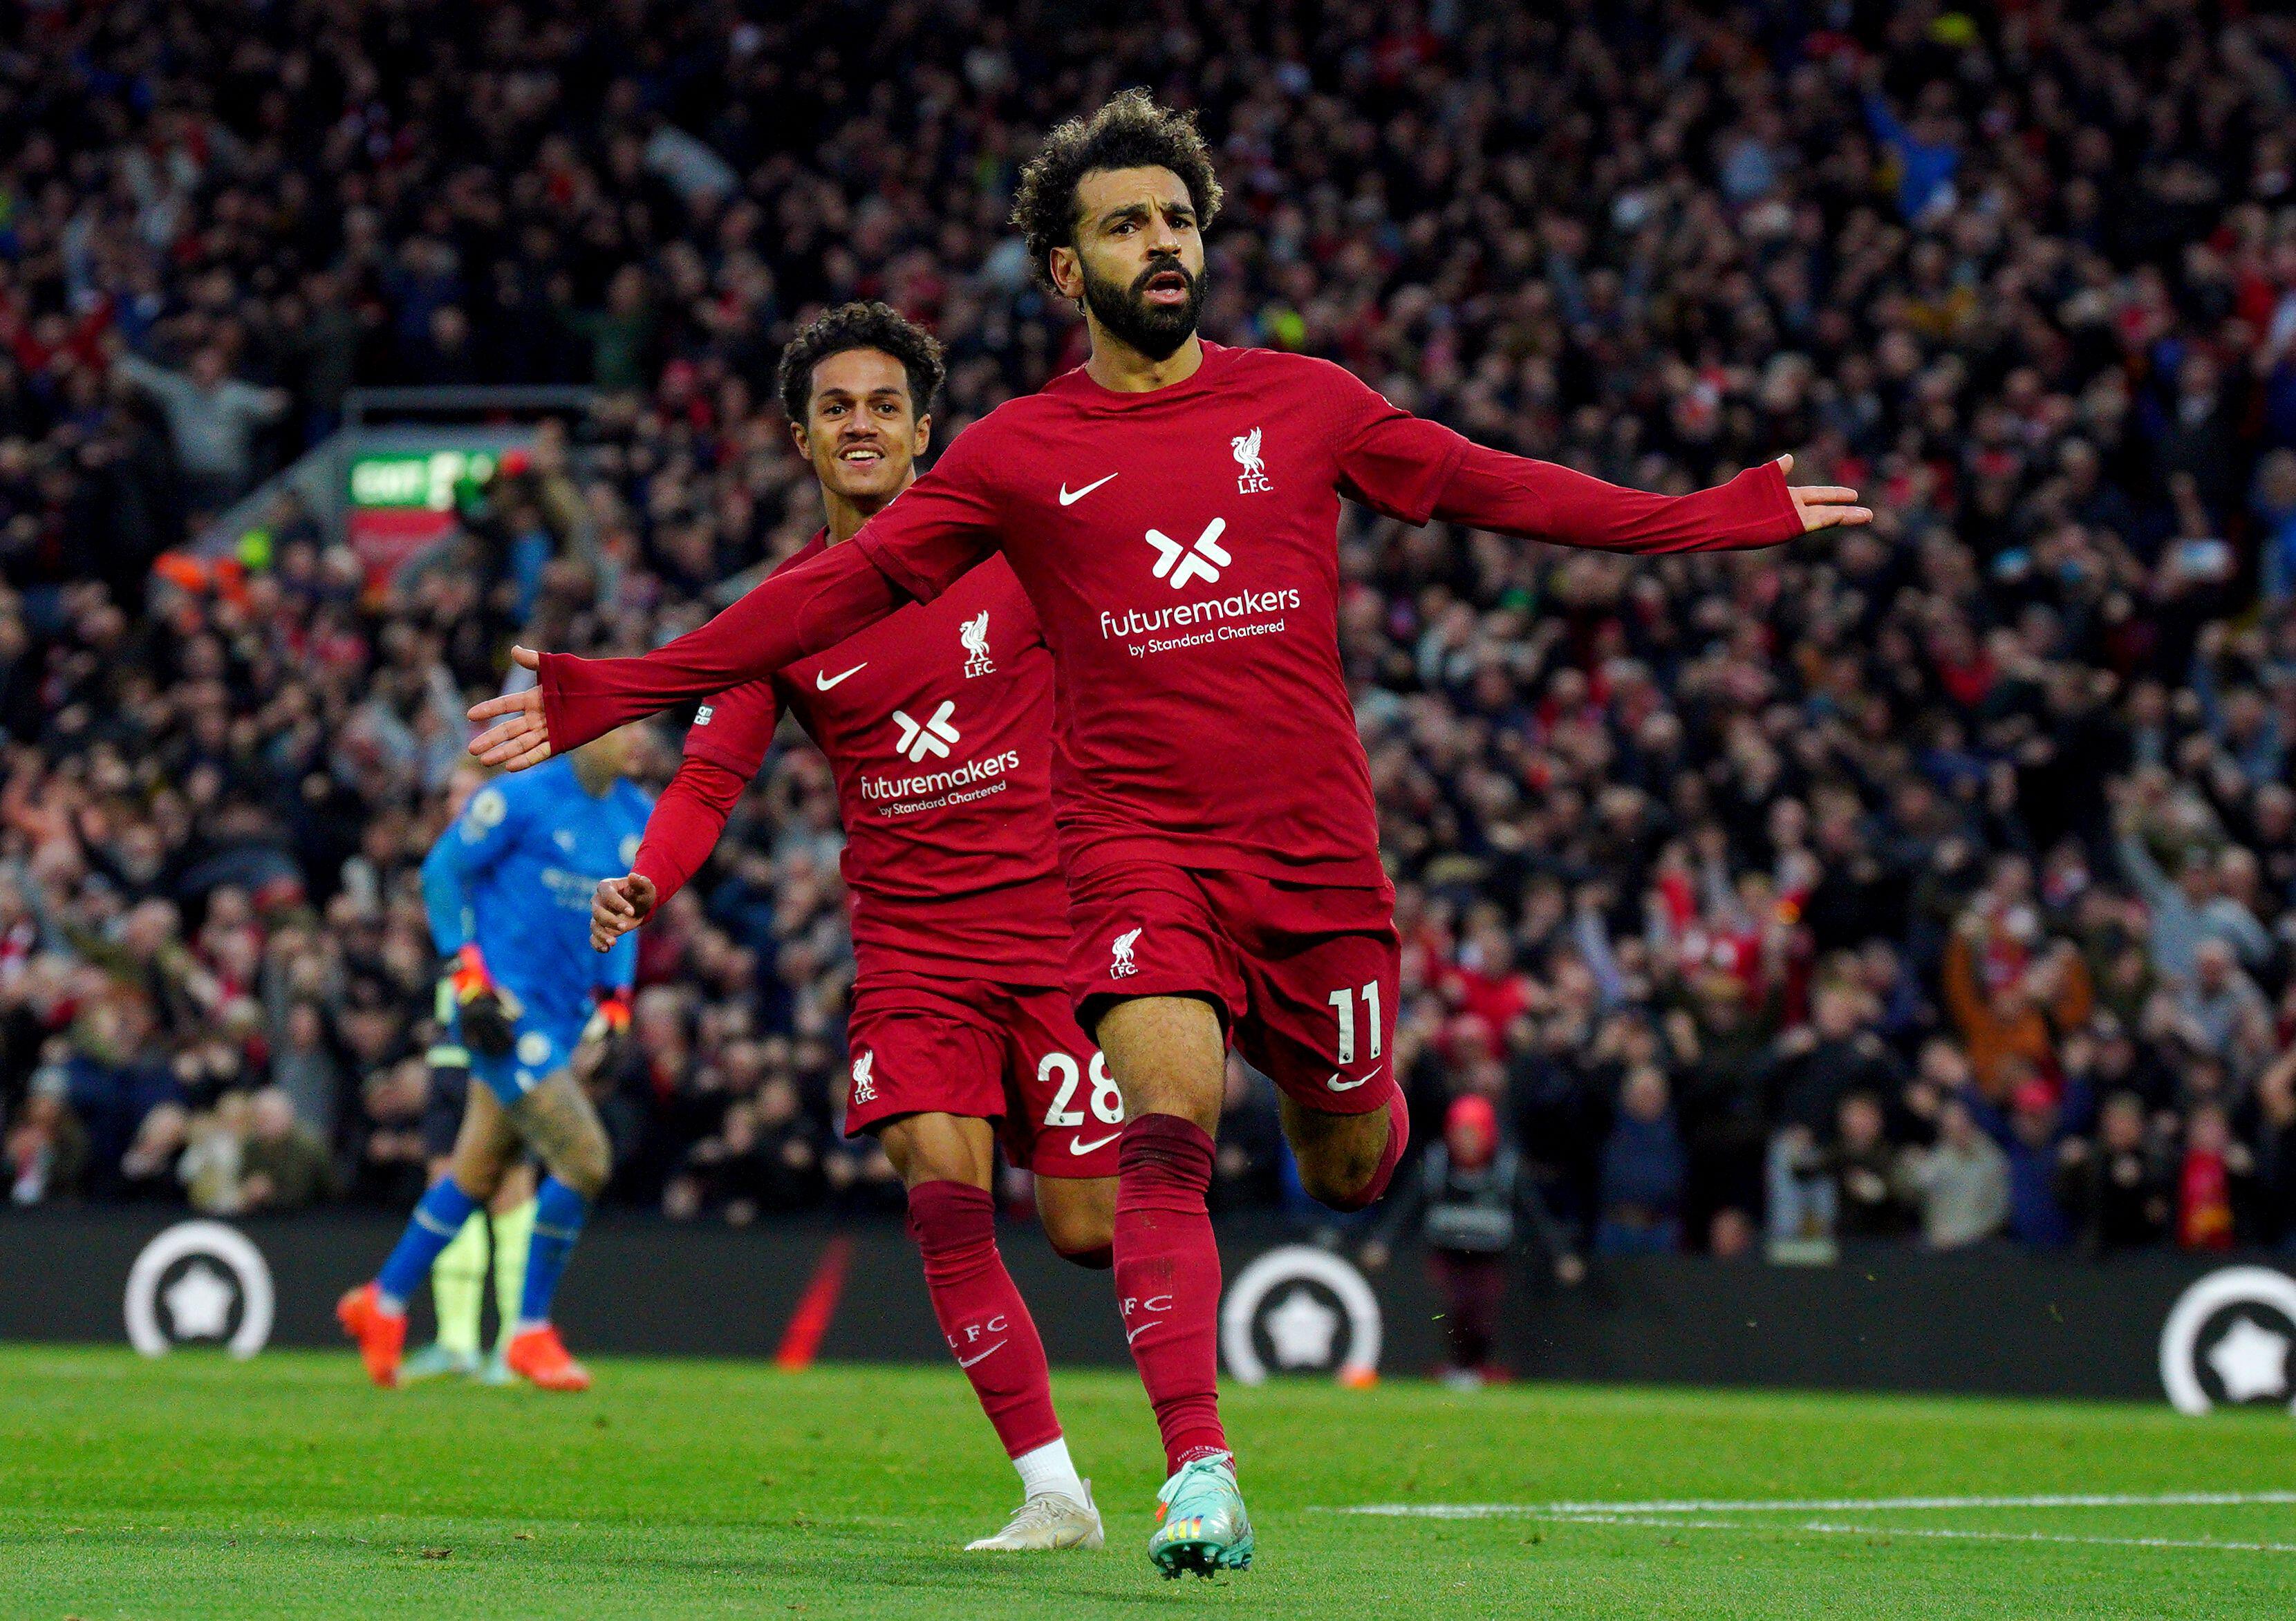 WATCH | Mohamed Salah and Alisson combine to break City hearts with sensational counter-attacking goal 